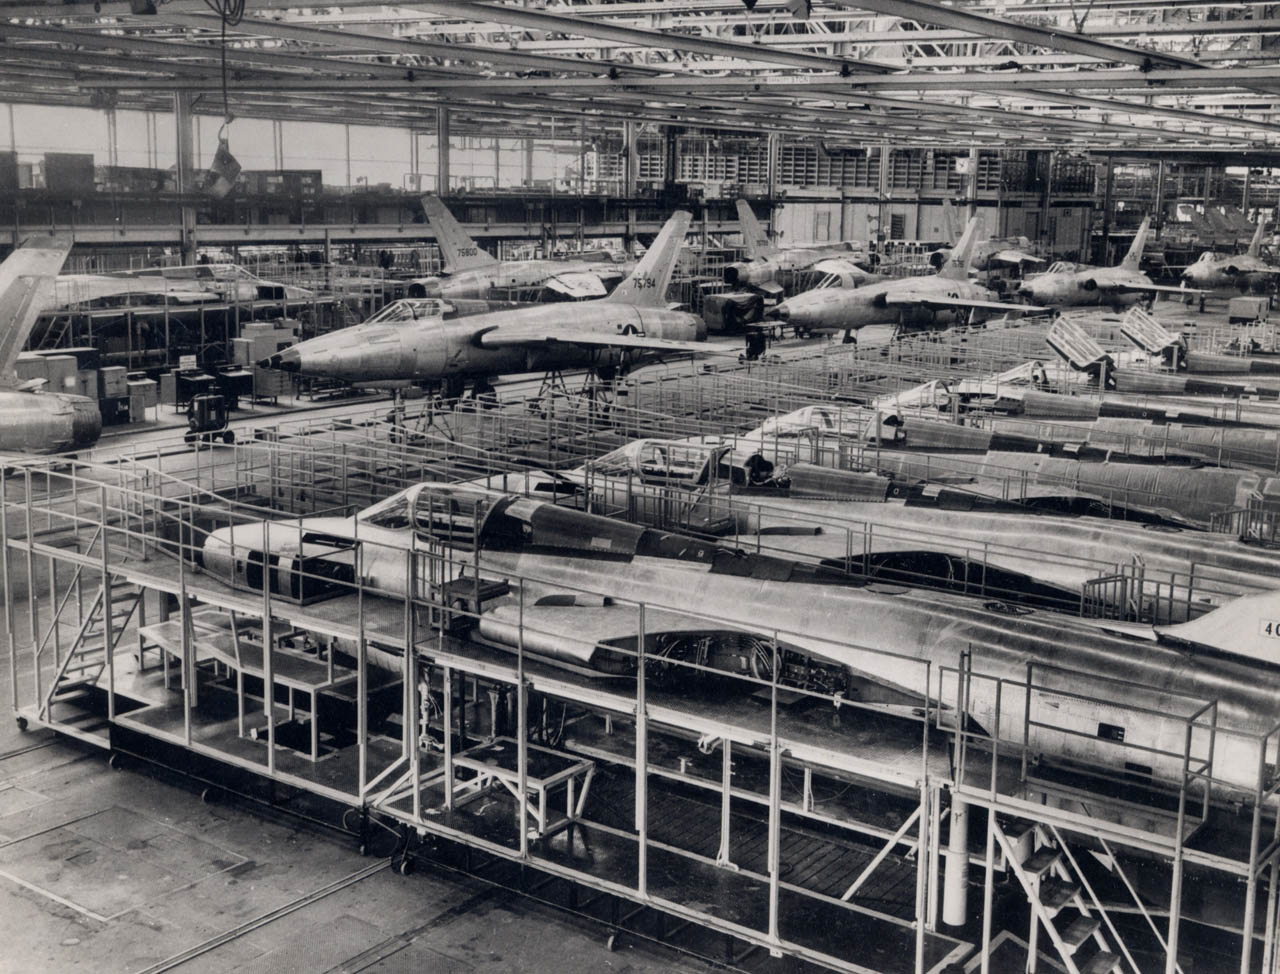 F-105 Thunderchiefs under construction at the Republic Aviation plant in Farmingdale, NY.  Though it acquired the unflattering nickname "Thud", the 105 was a capable fighter-bomber which served from 1958 to 1984.